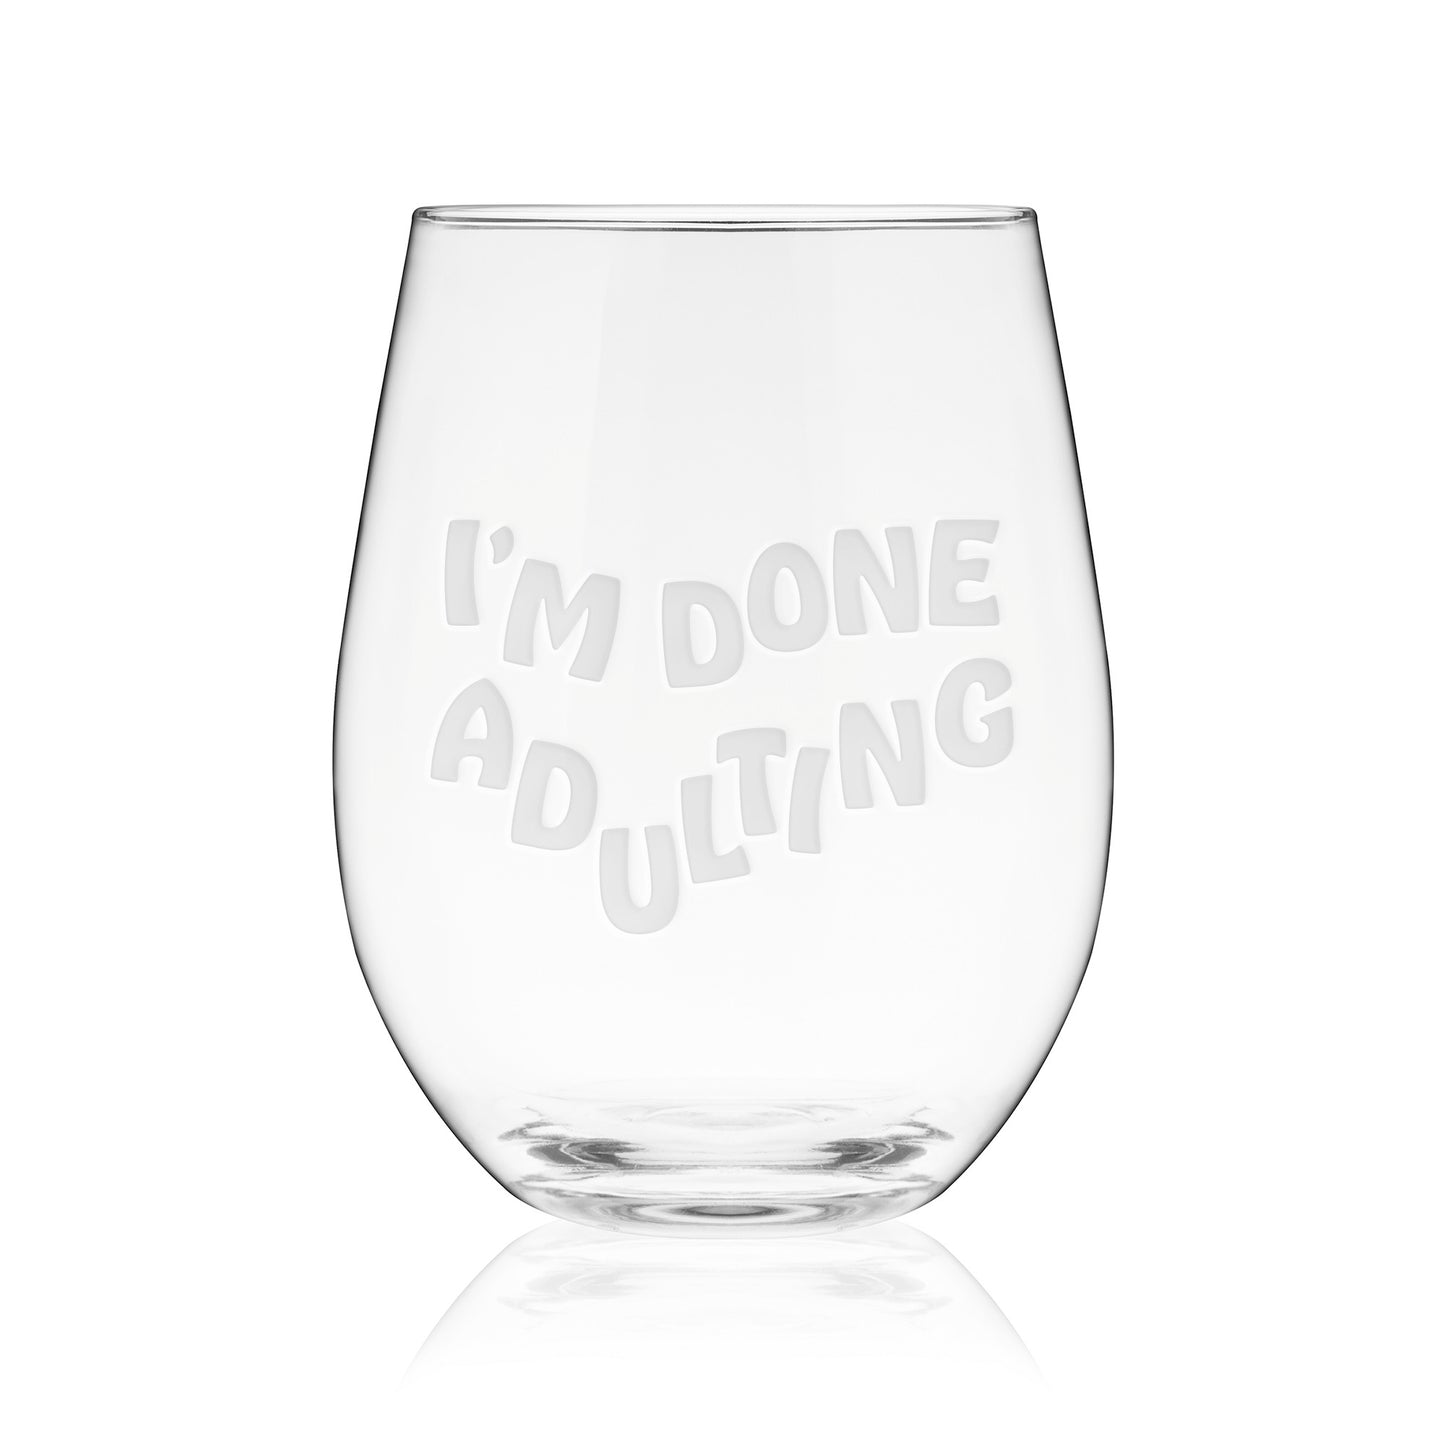 I'm Done Adulting Stemless Wine Glass